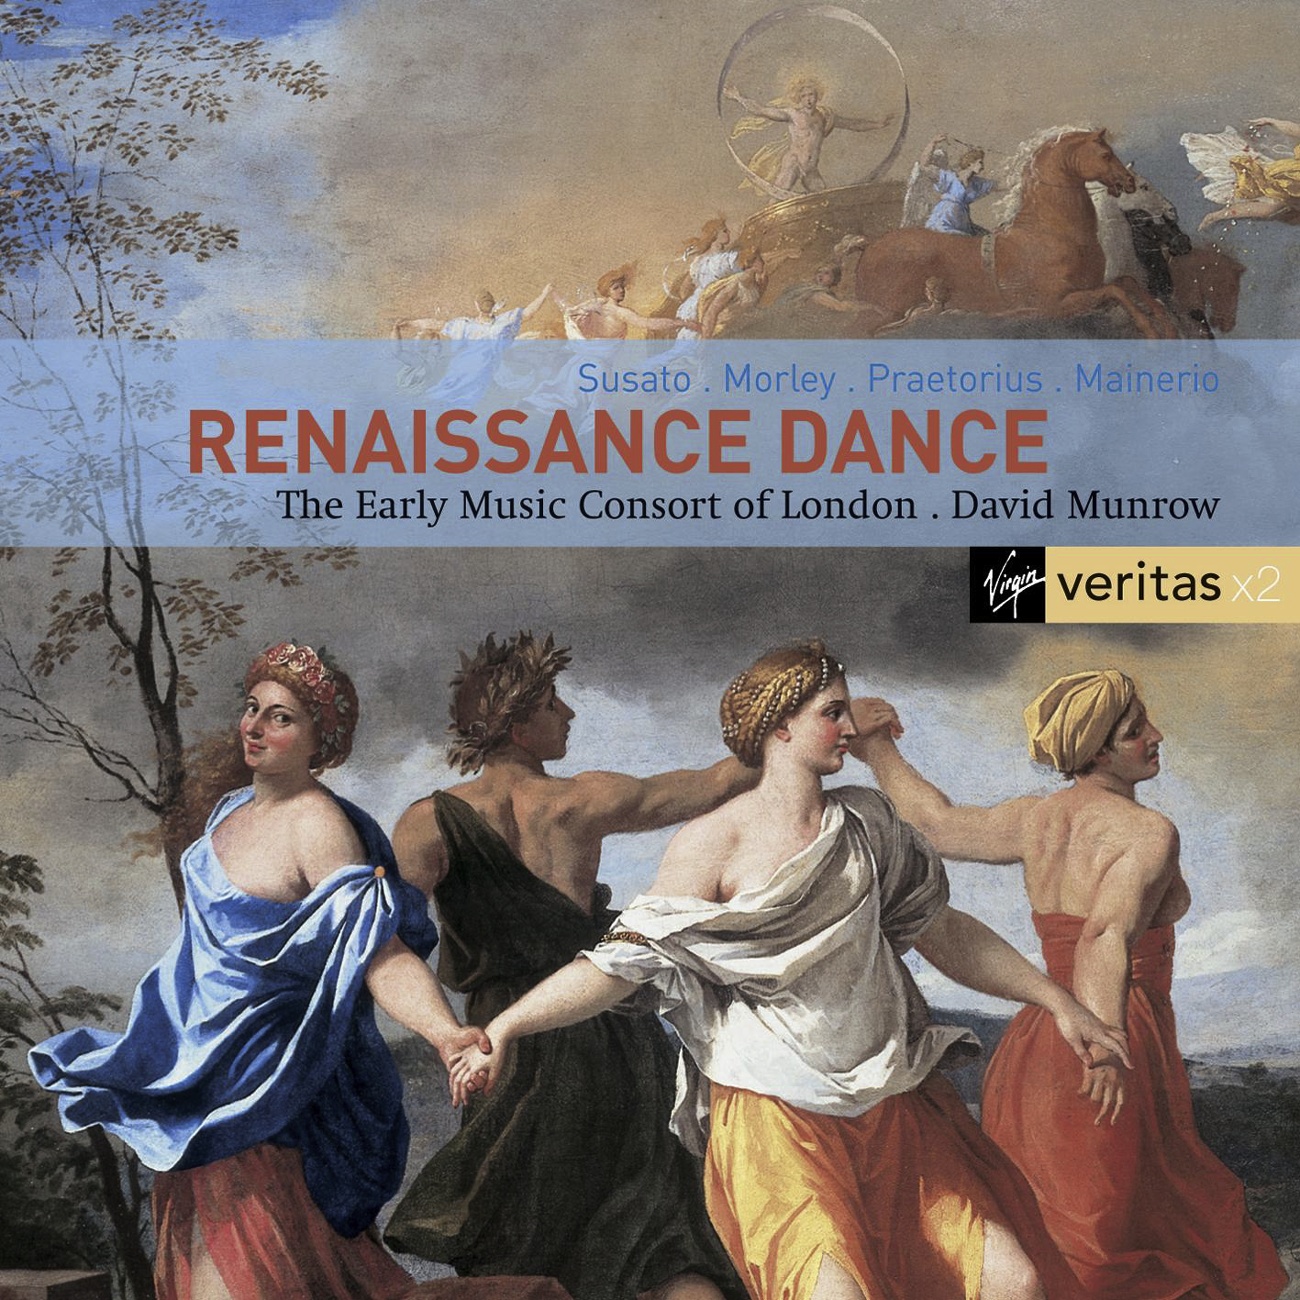 Dances from Broken Consort from Thomas Morley/ First Book of Consort (2005 Digital Remaster): The Jew's Dance (Richard Nicholson)